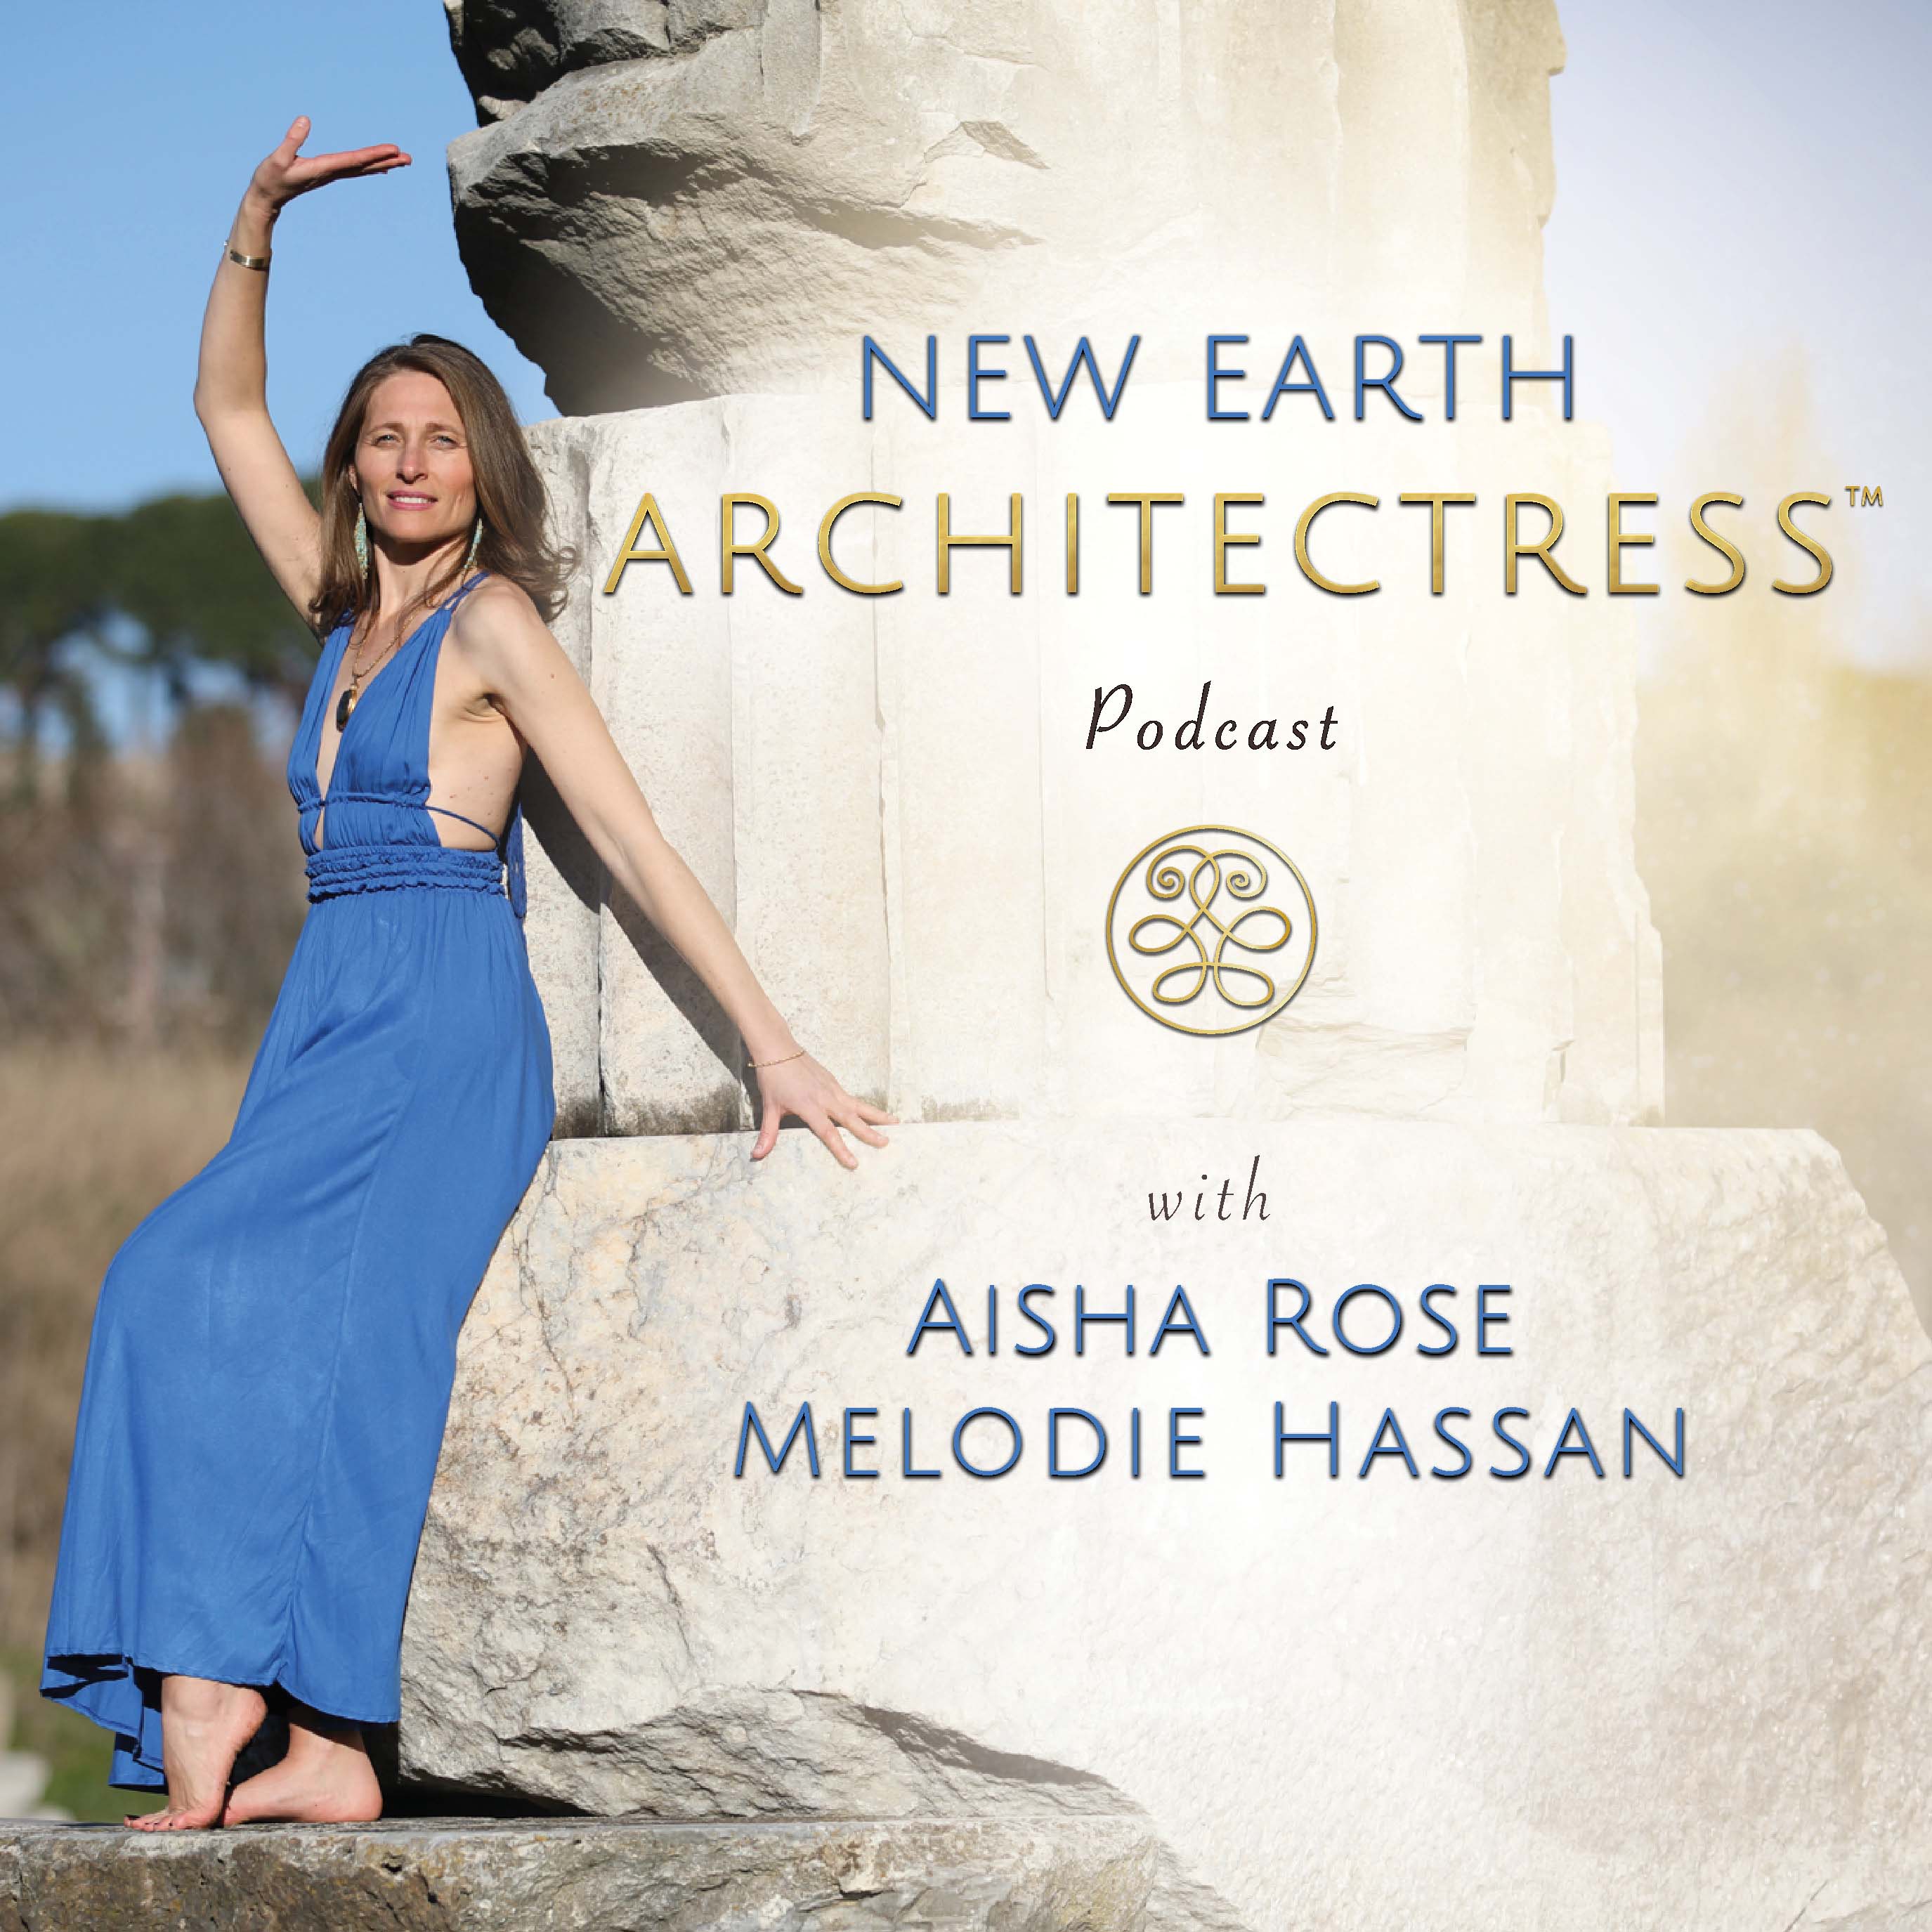 Artwork for New Earth Architectress™